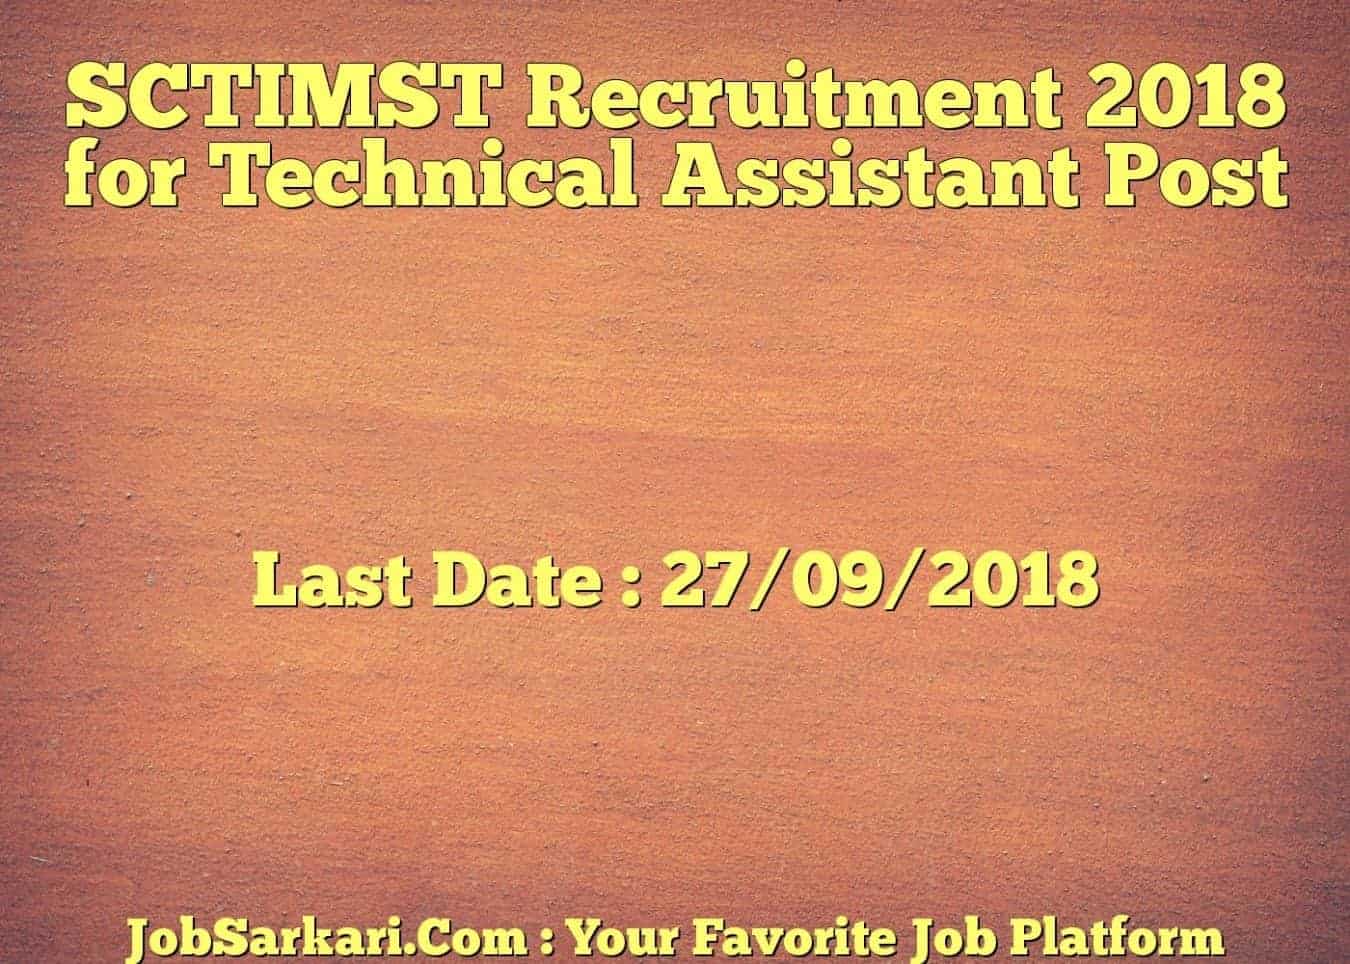 SCTIMST Recruitment 2018 for Technical Assistant Post